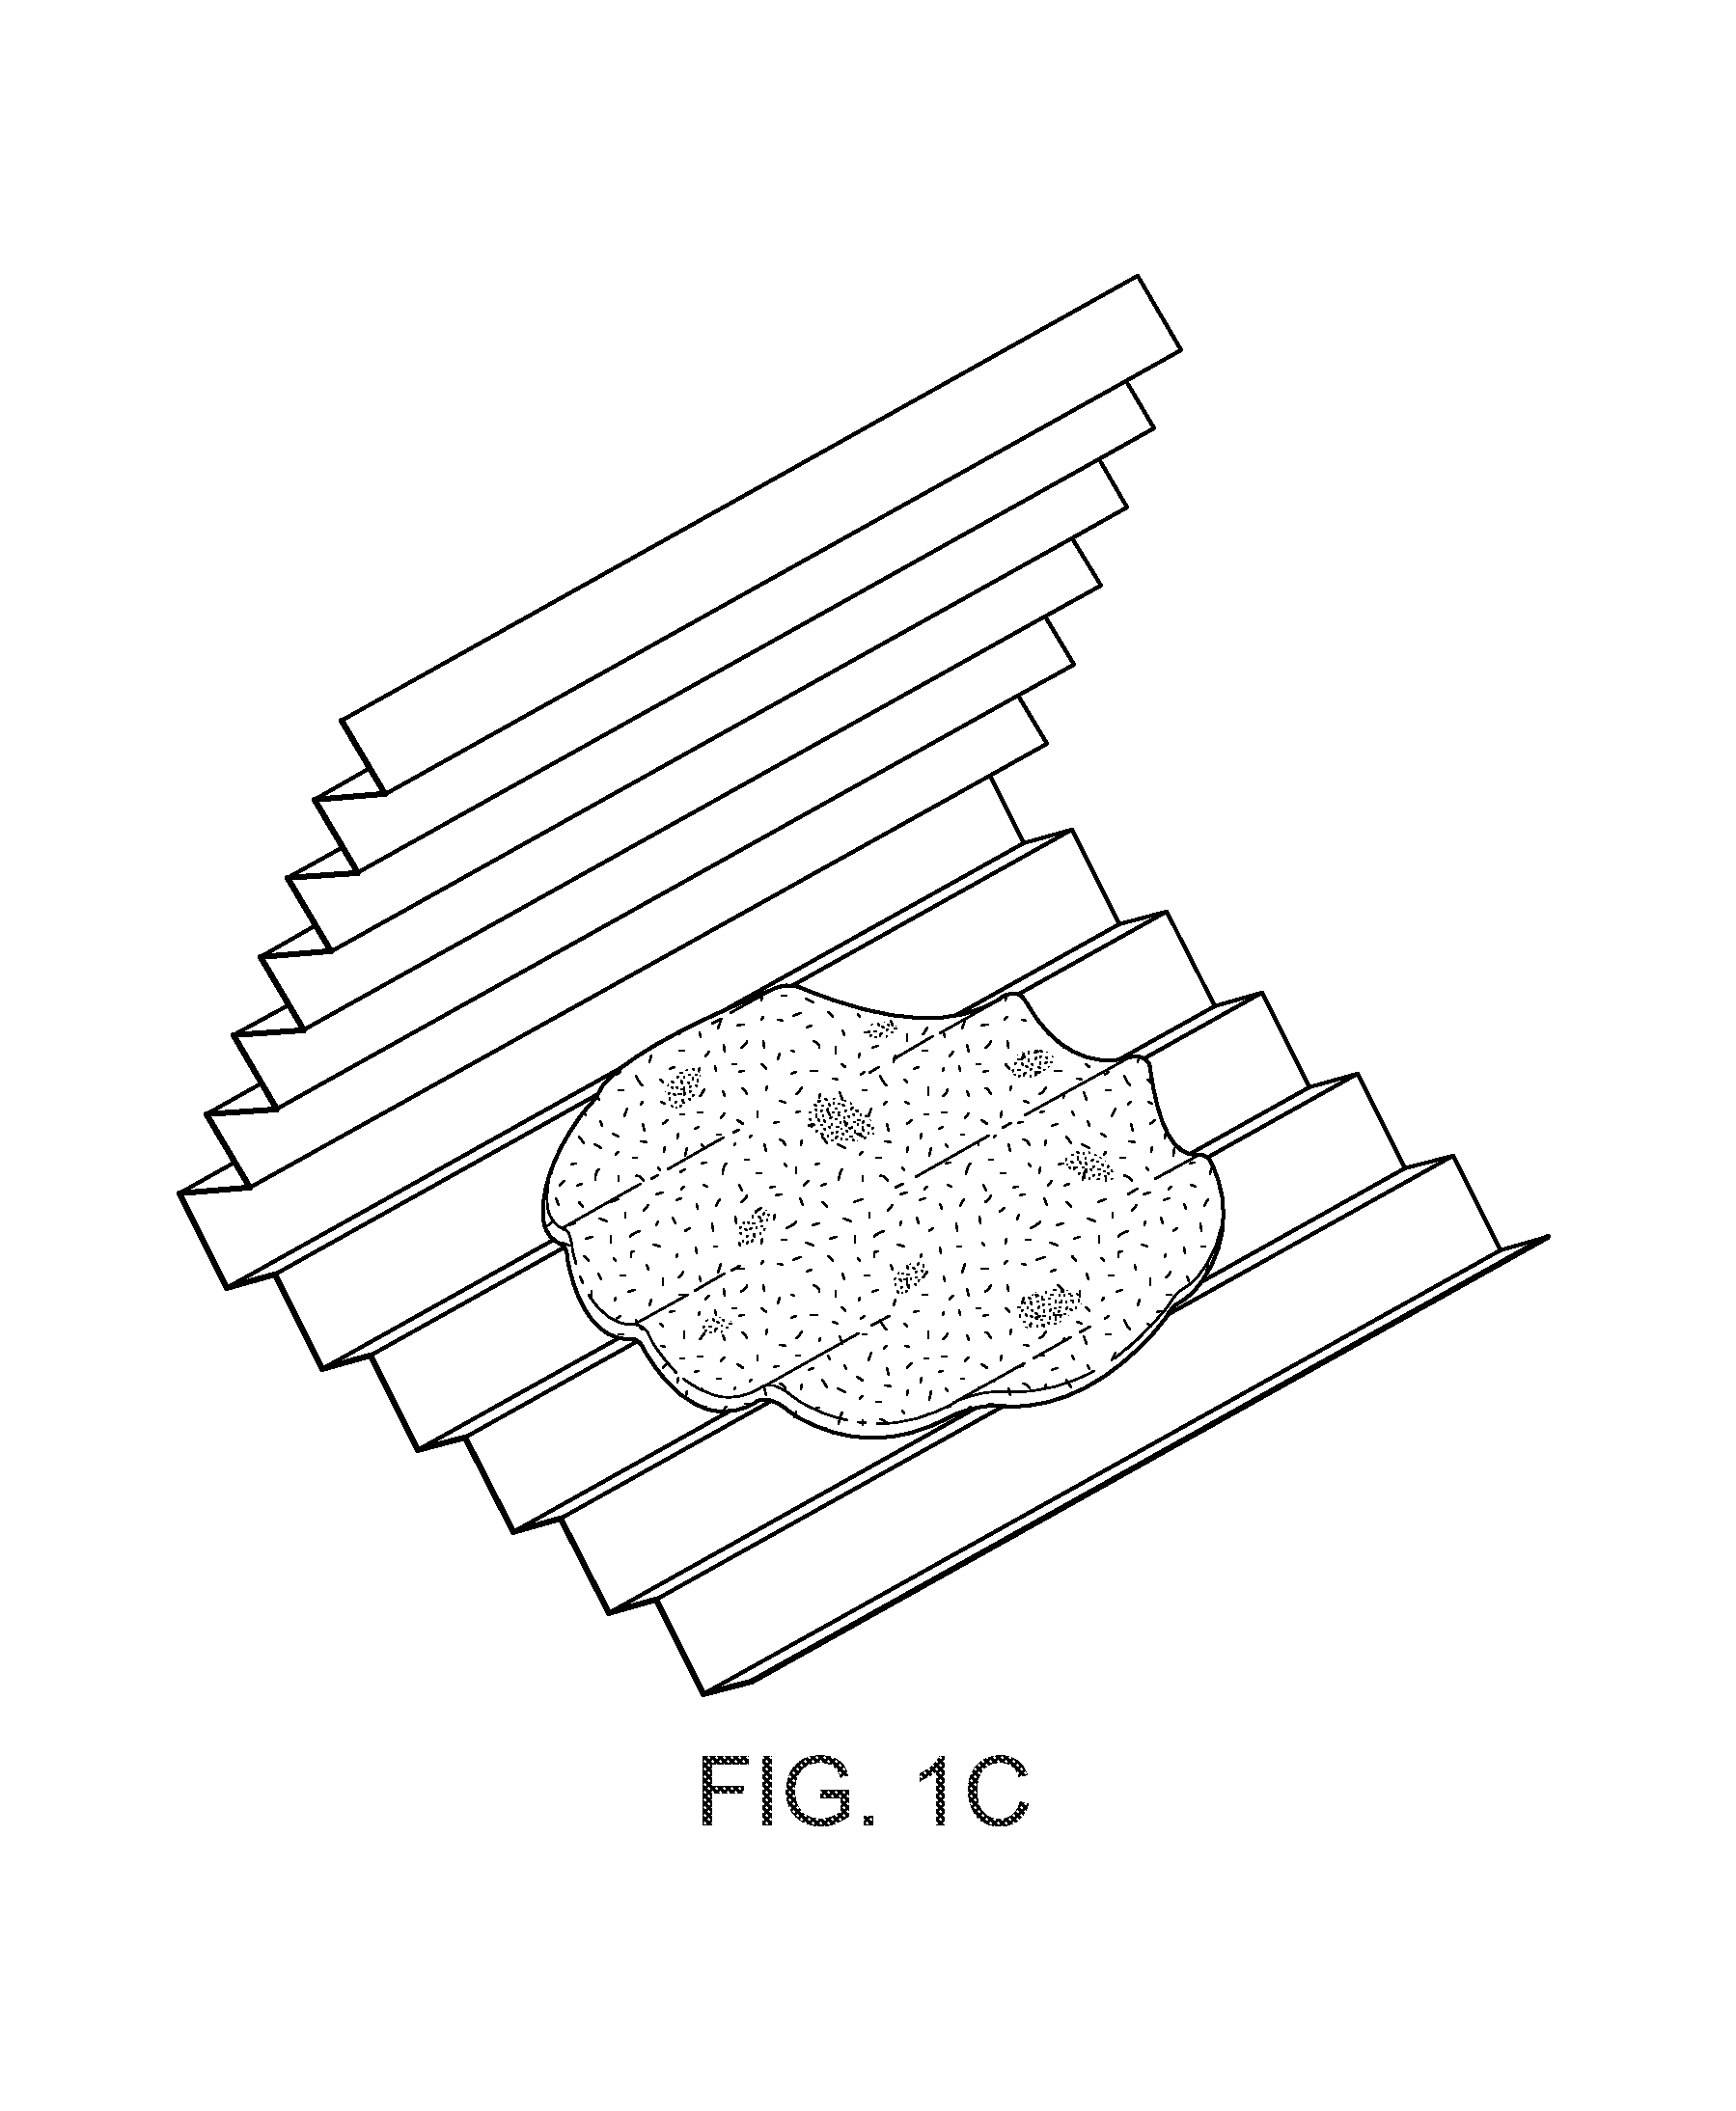 Accordion susceptor for microwave preparation of cookies